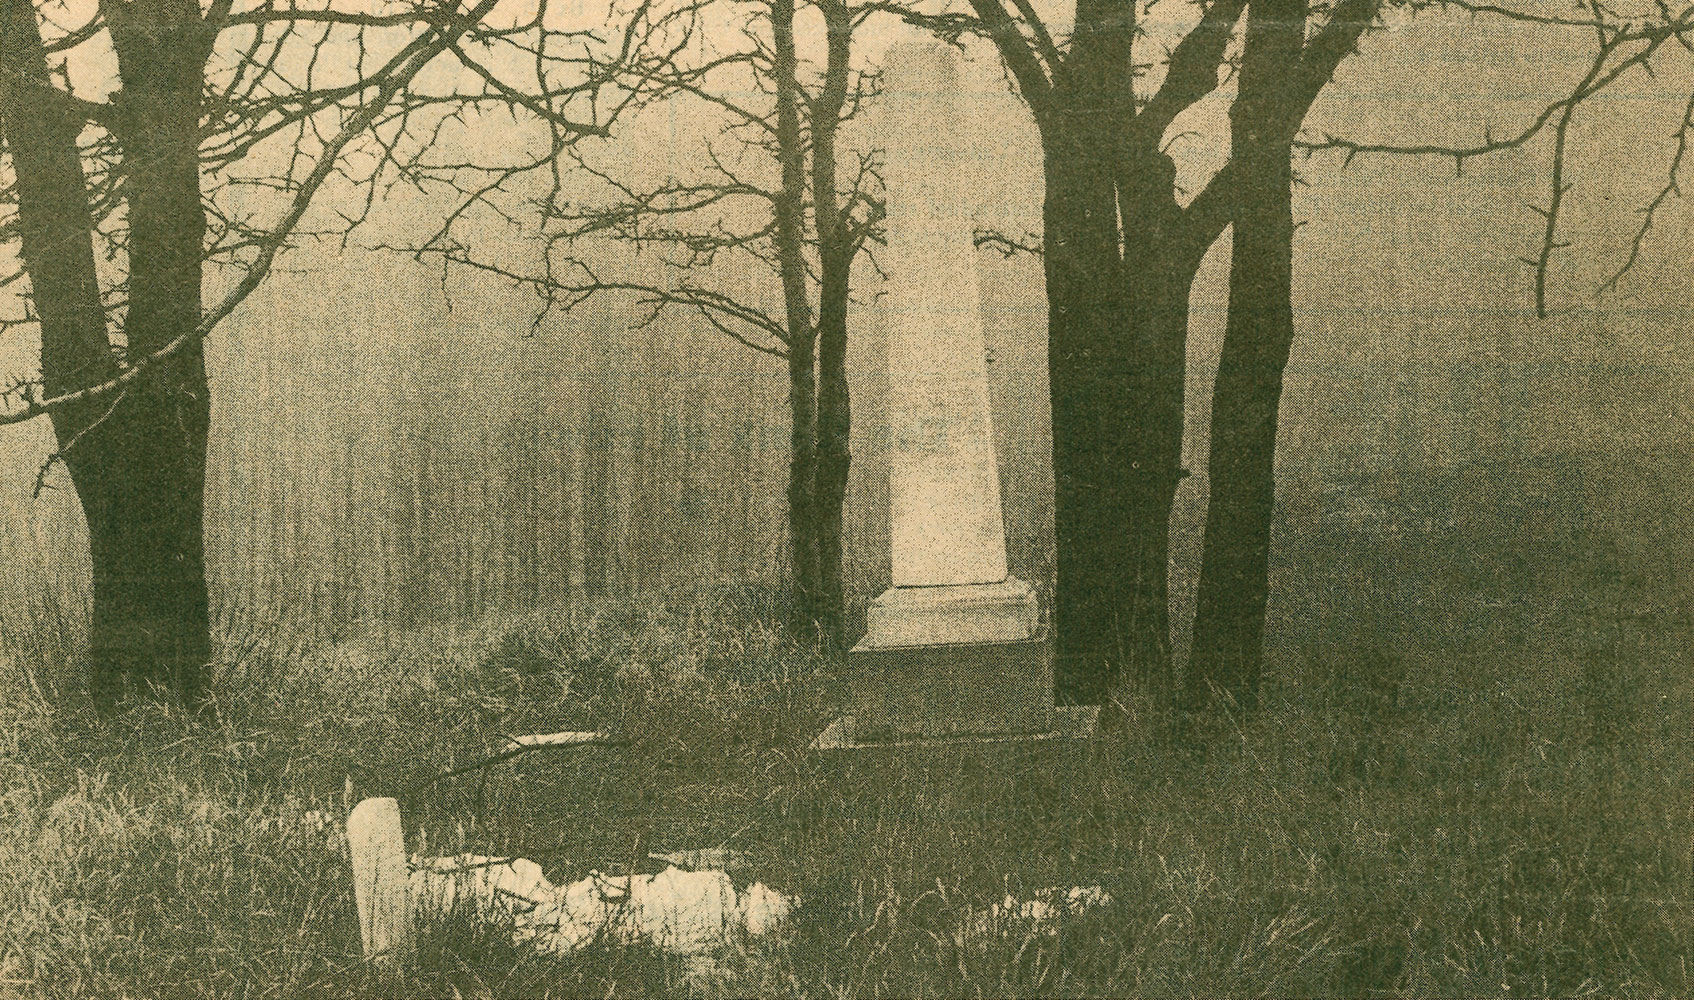 The earliest known photograph of the cemetery.